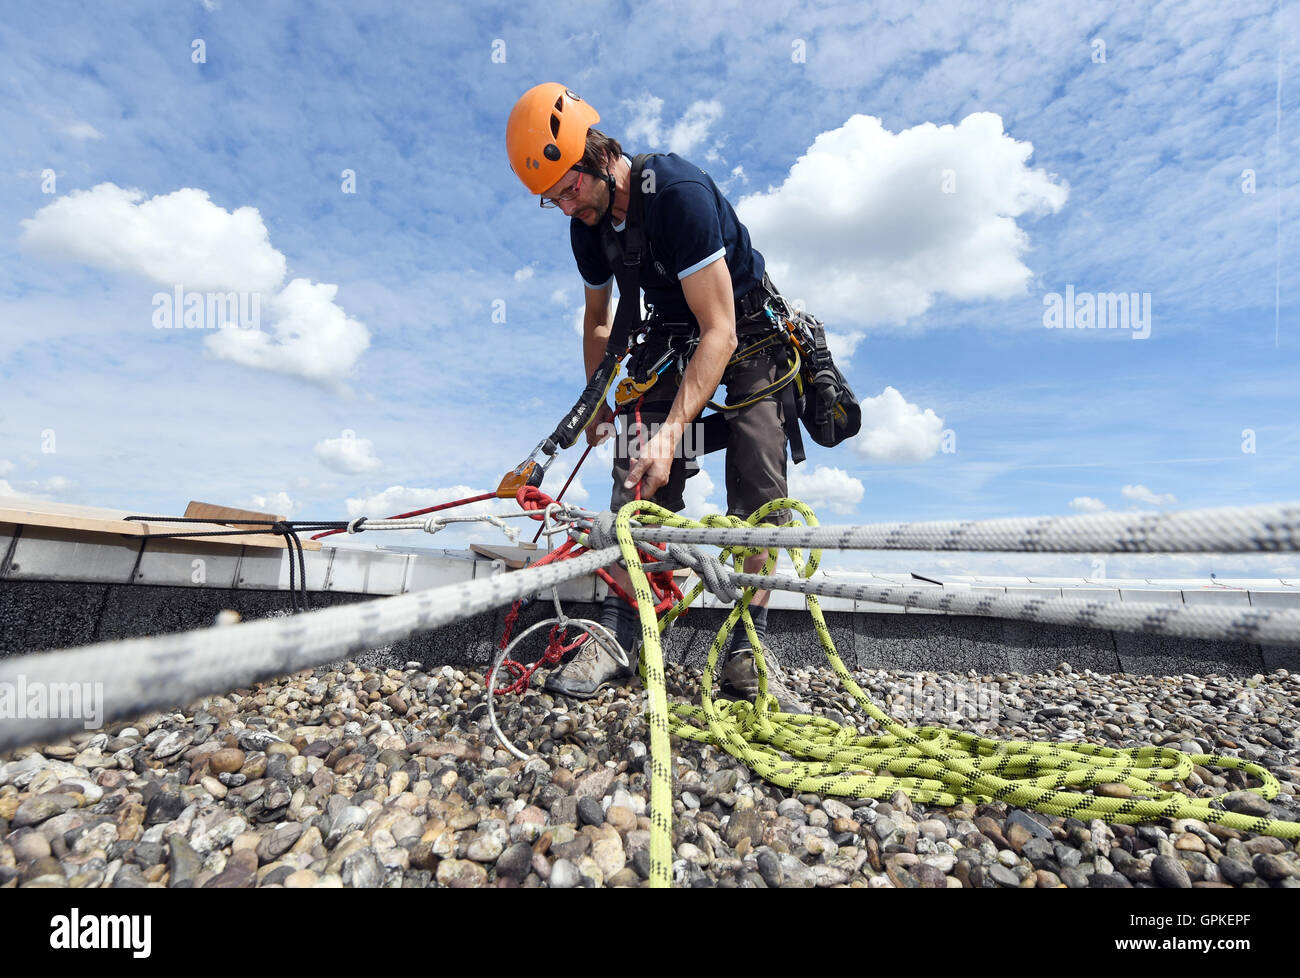 Karlsruhe, Germany. 11th Aug, 2016. Industrial climber Juergen Heinz-Pommer working on the facade of a skyscraper in Karlsruhe, Germany, 11 August 2016. PHOTO: ULI DECK/dpa/Alamy Live News Stock Photo